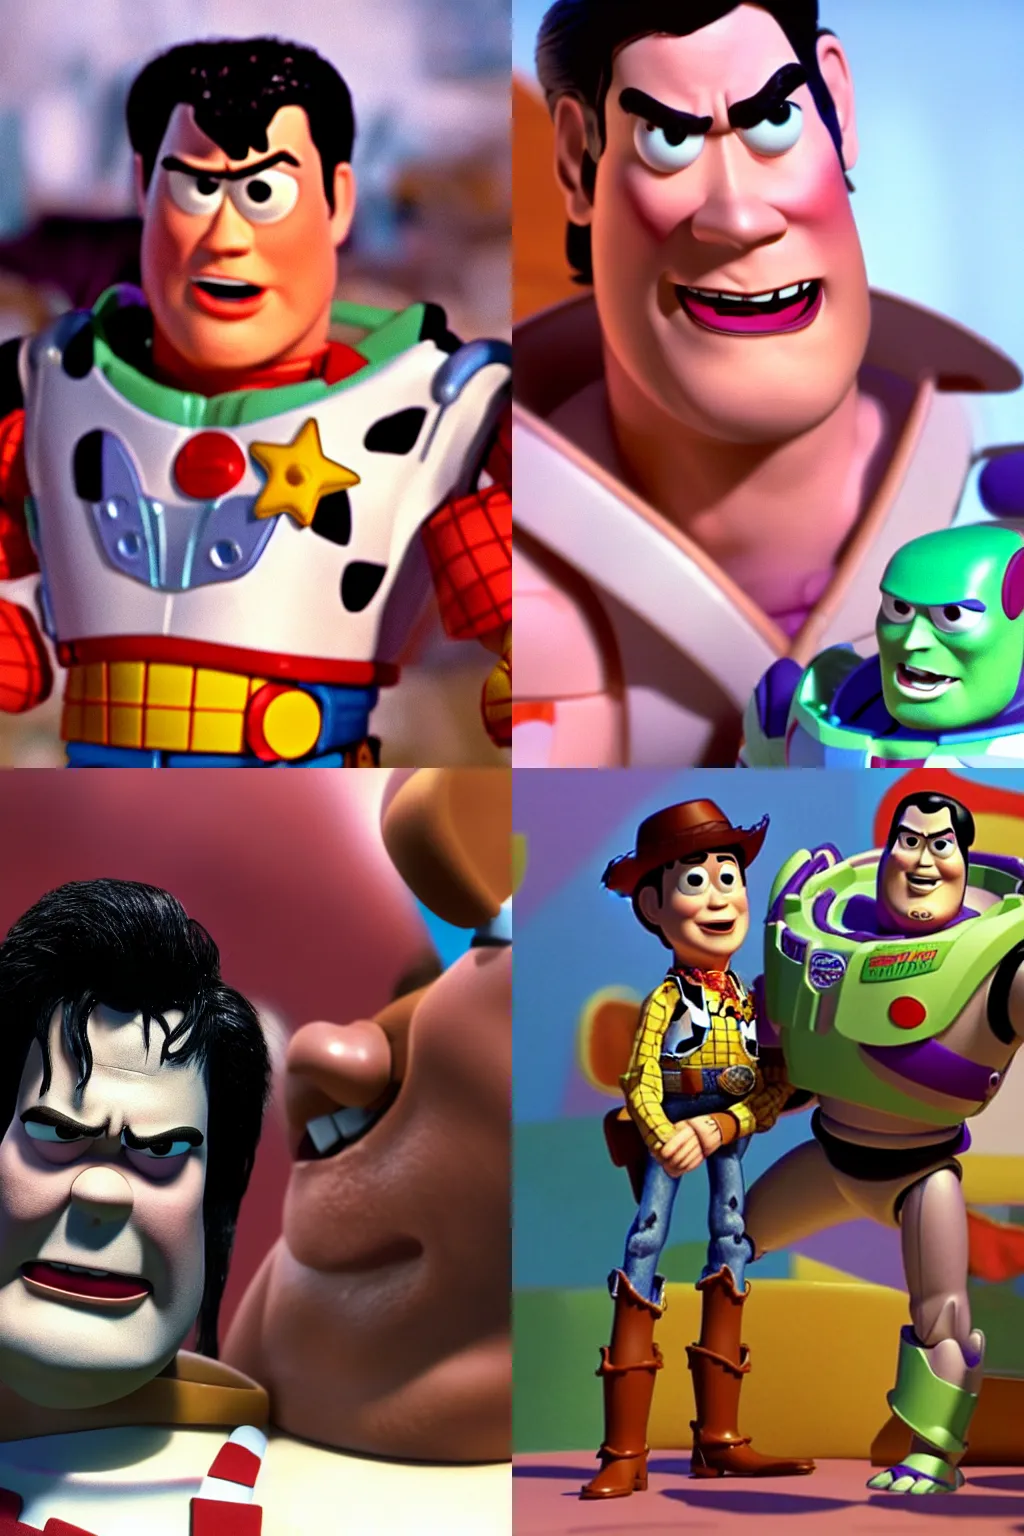 Prompt: Glenn Danzig as a toy from Toy Story, movie still, close-up, high quality, 4k